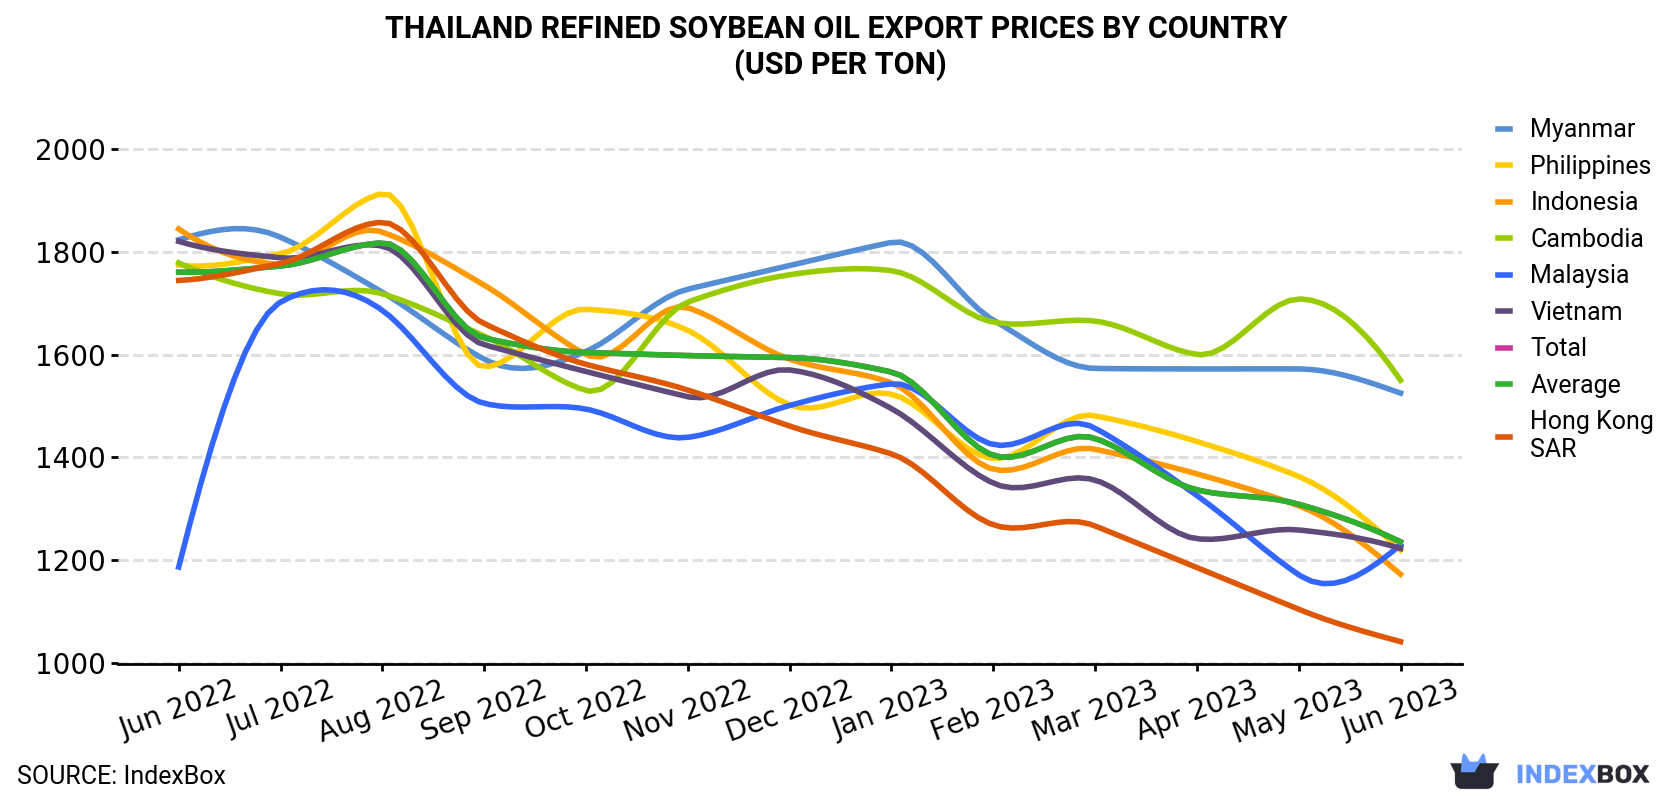 Thailand Refined Soybean Oil Export Prices By Country (USD Per Ton)